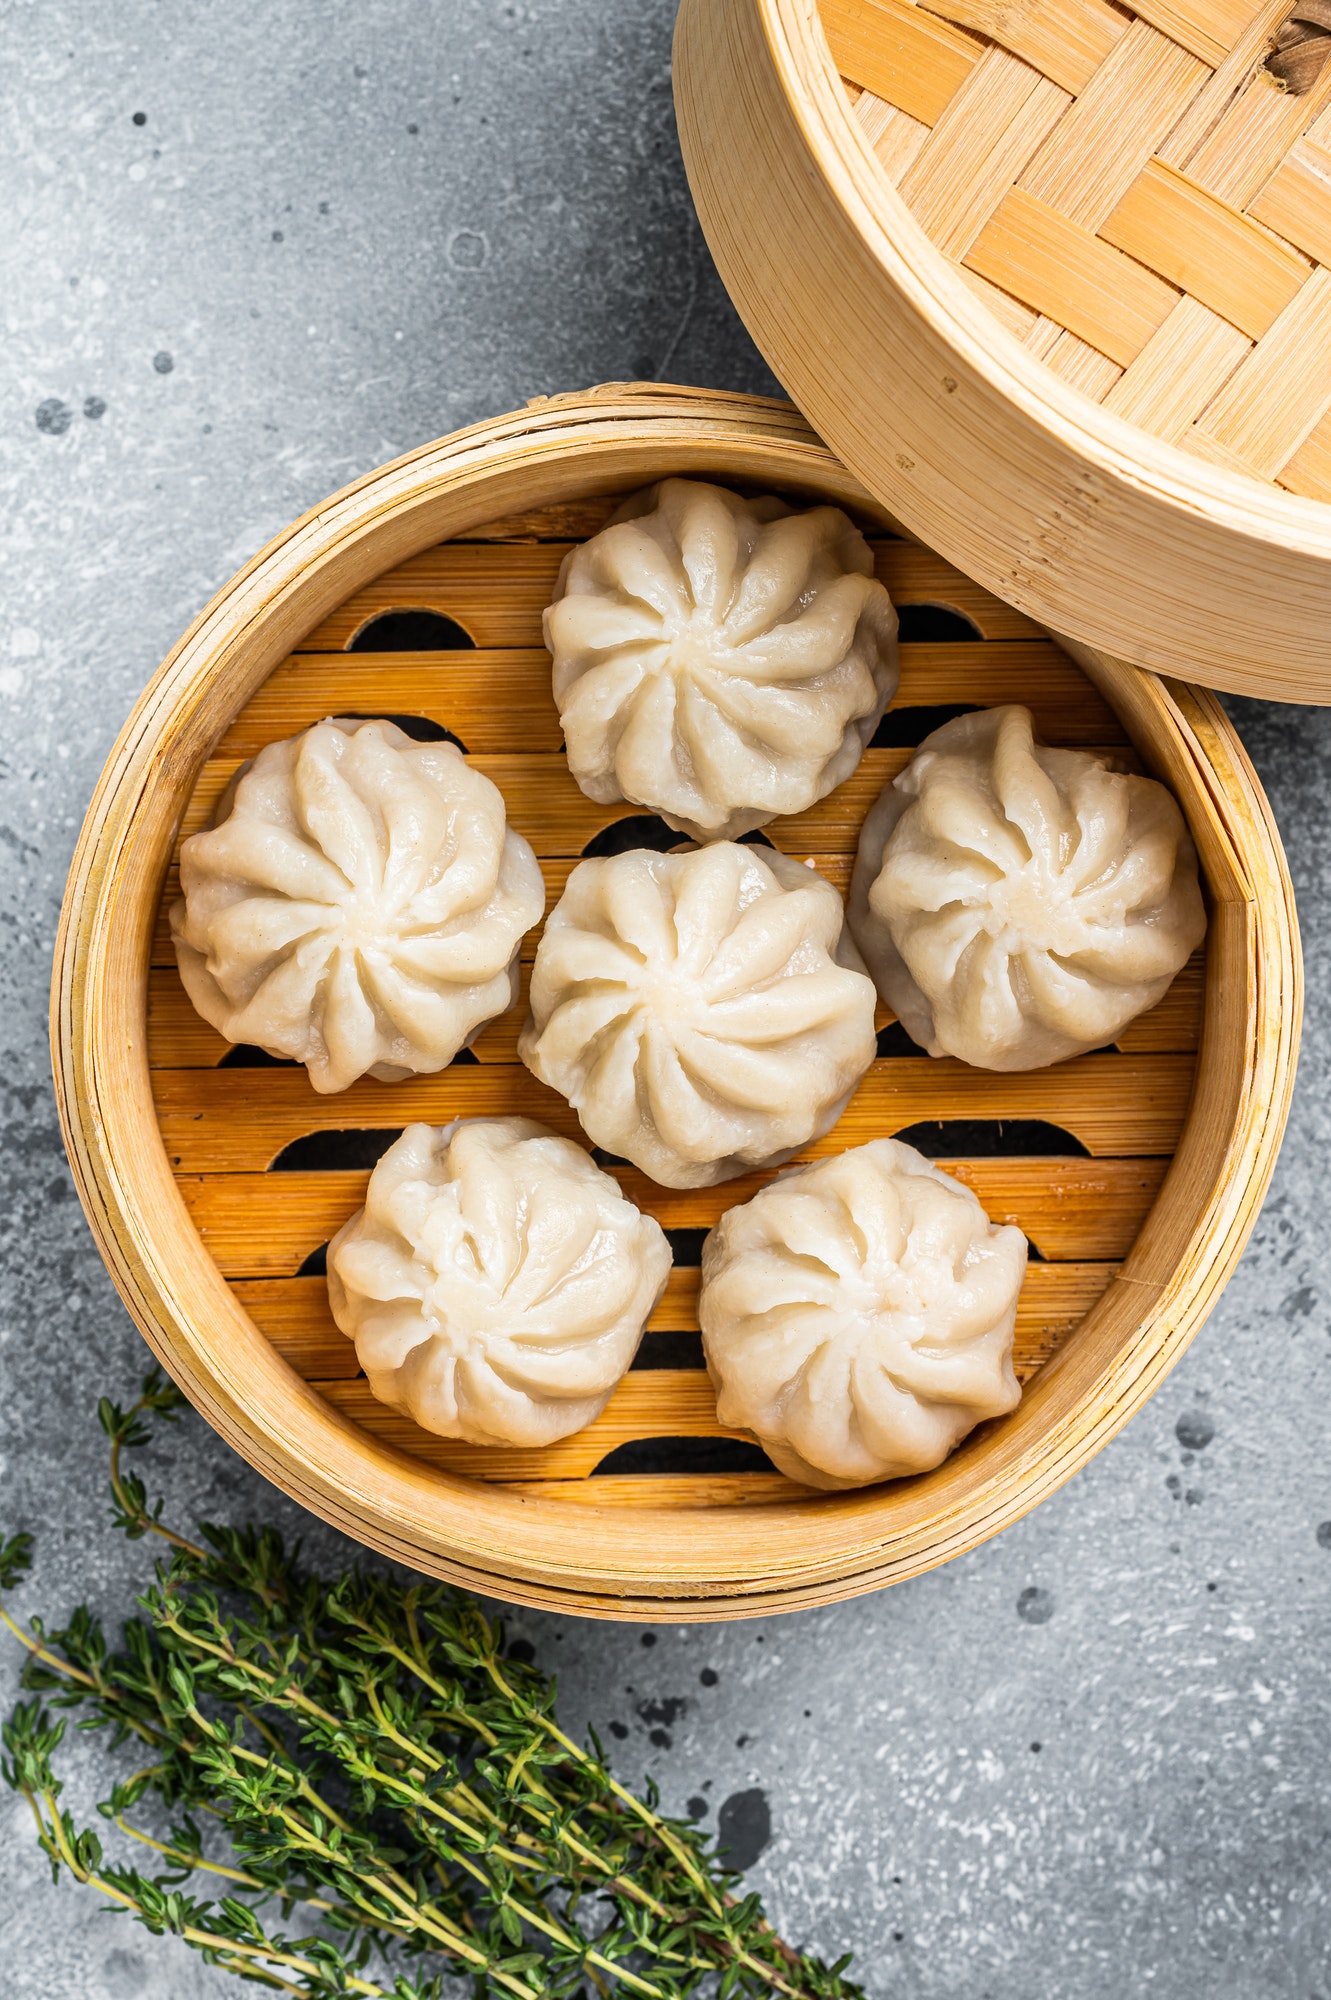 Steamed baozi dumplings stuffed with meat in a bamboo steamer. Gray background. Top view